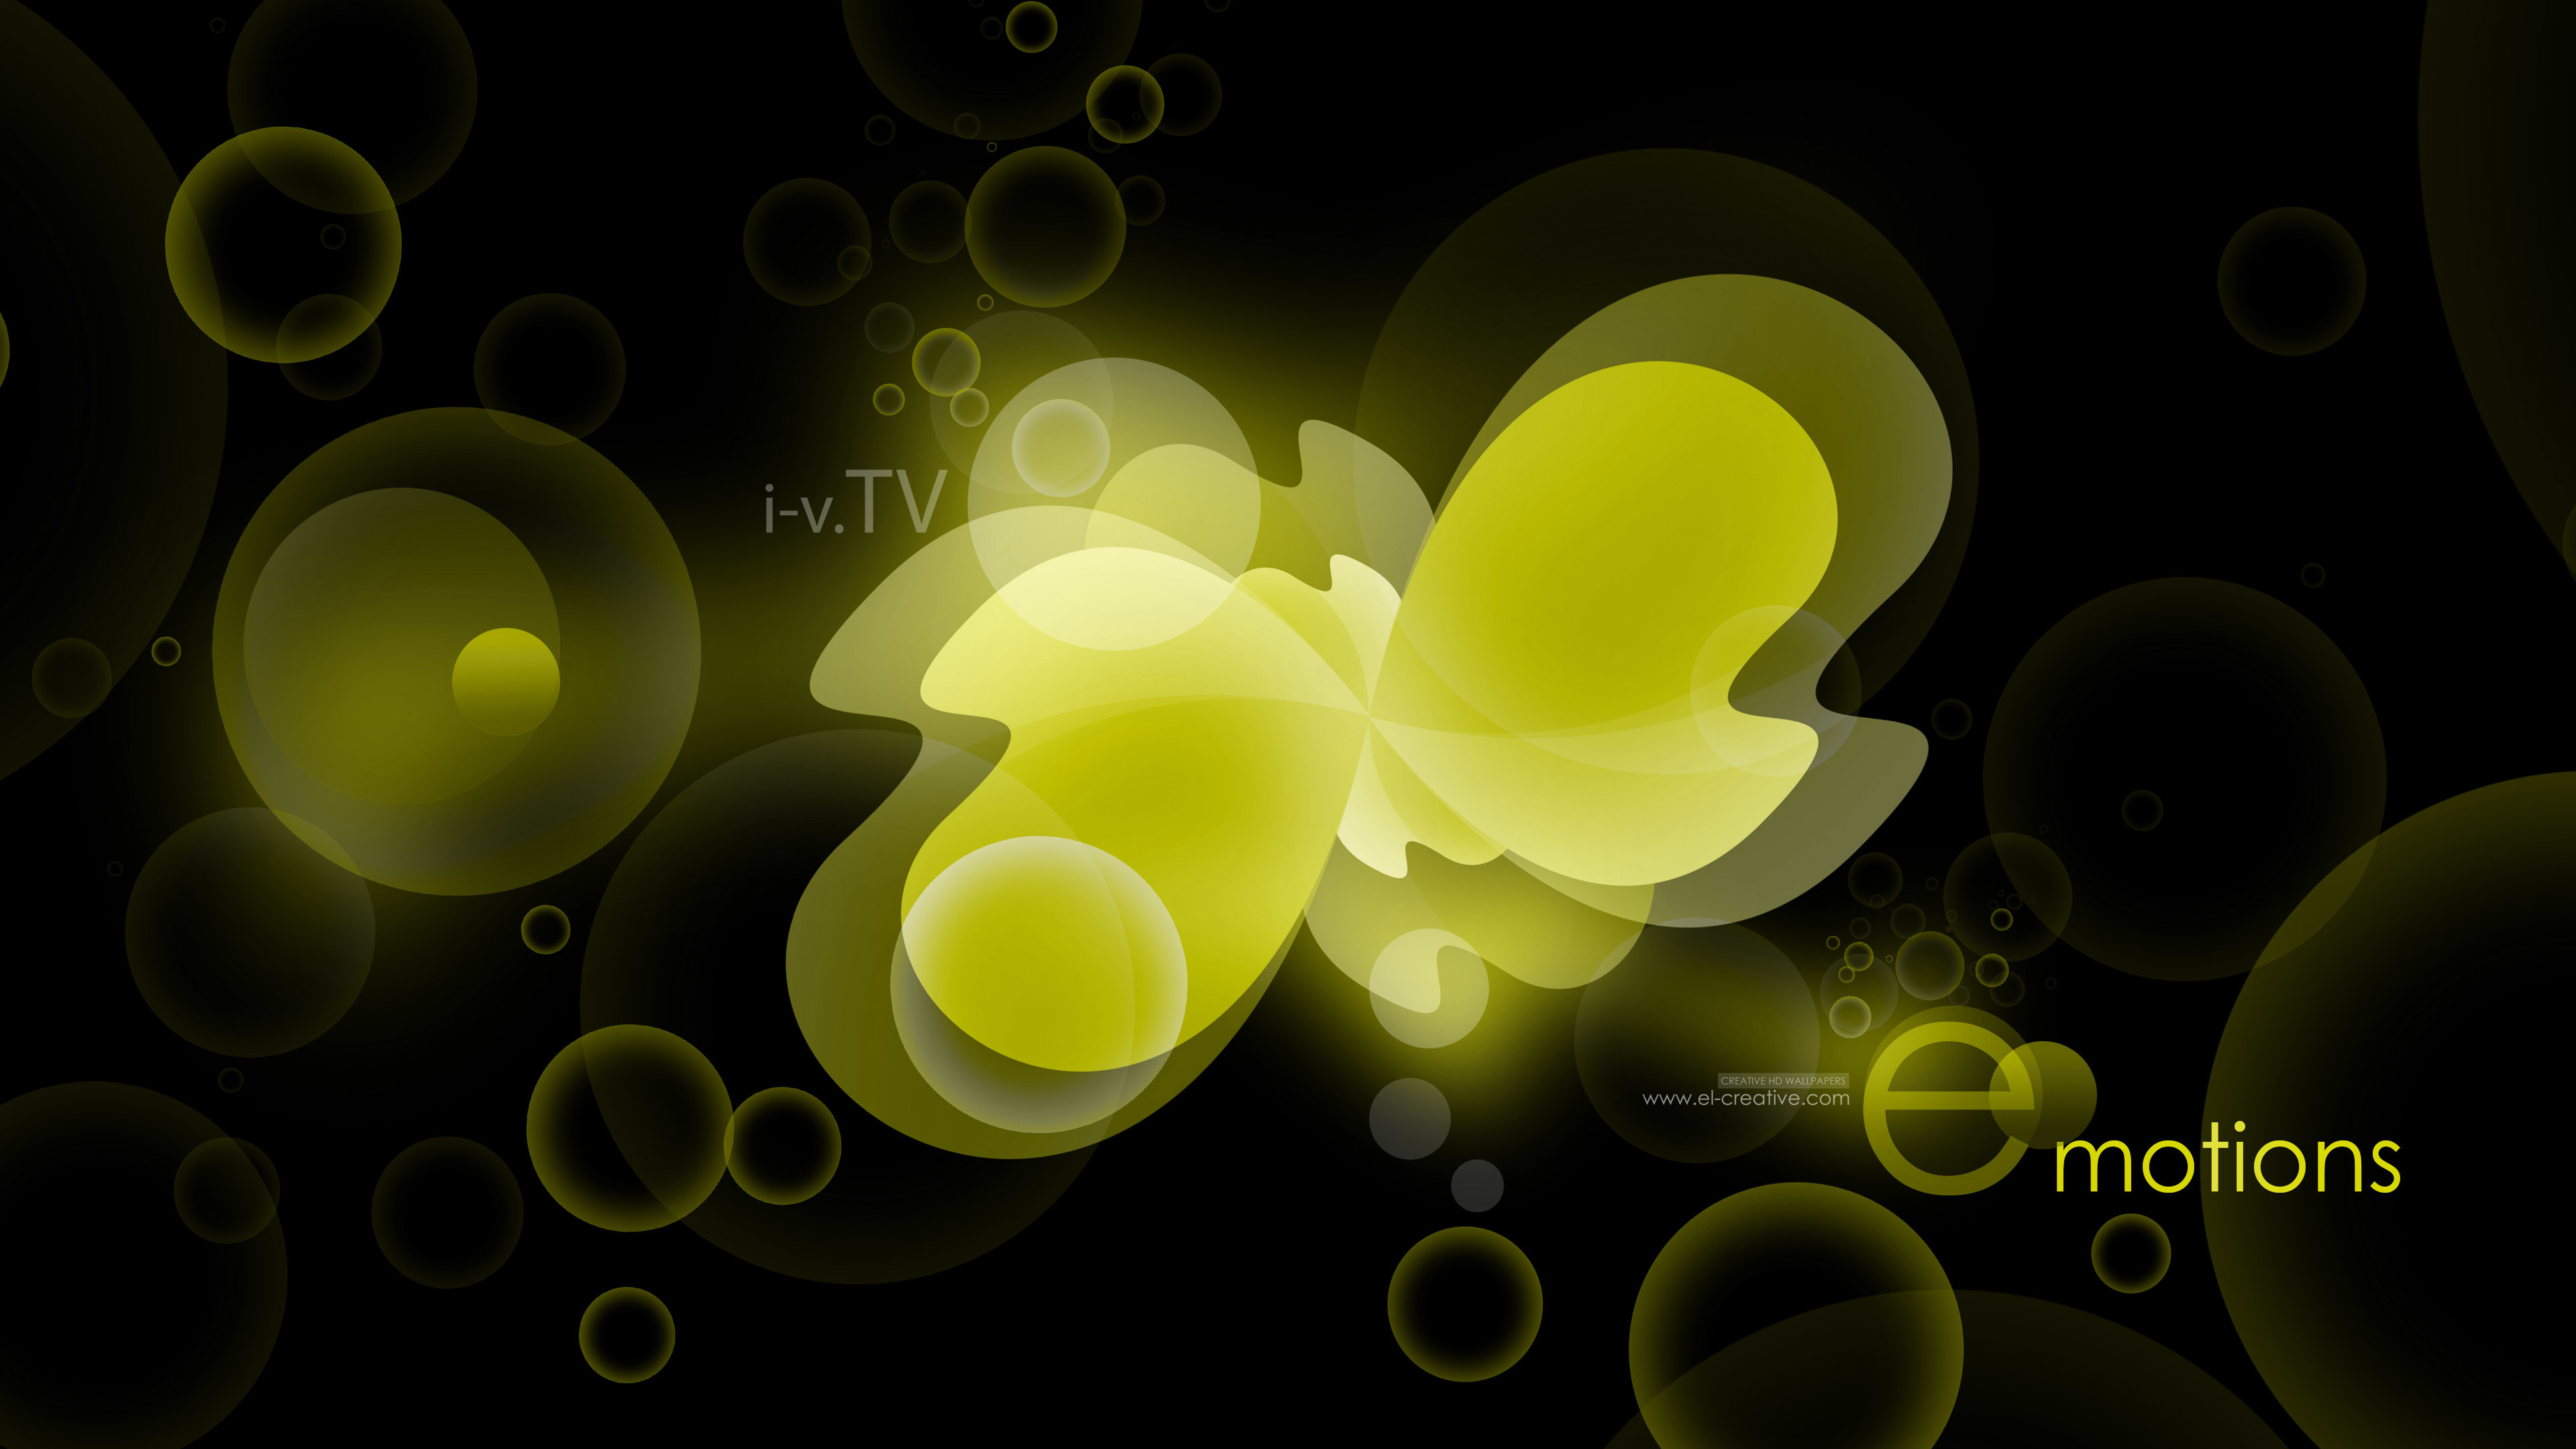 3840x2160 Emotions Petals Abstract Style Tony Art Wallpapers Ino Vision Simple  Creative Bubble. bay window seat ...